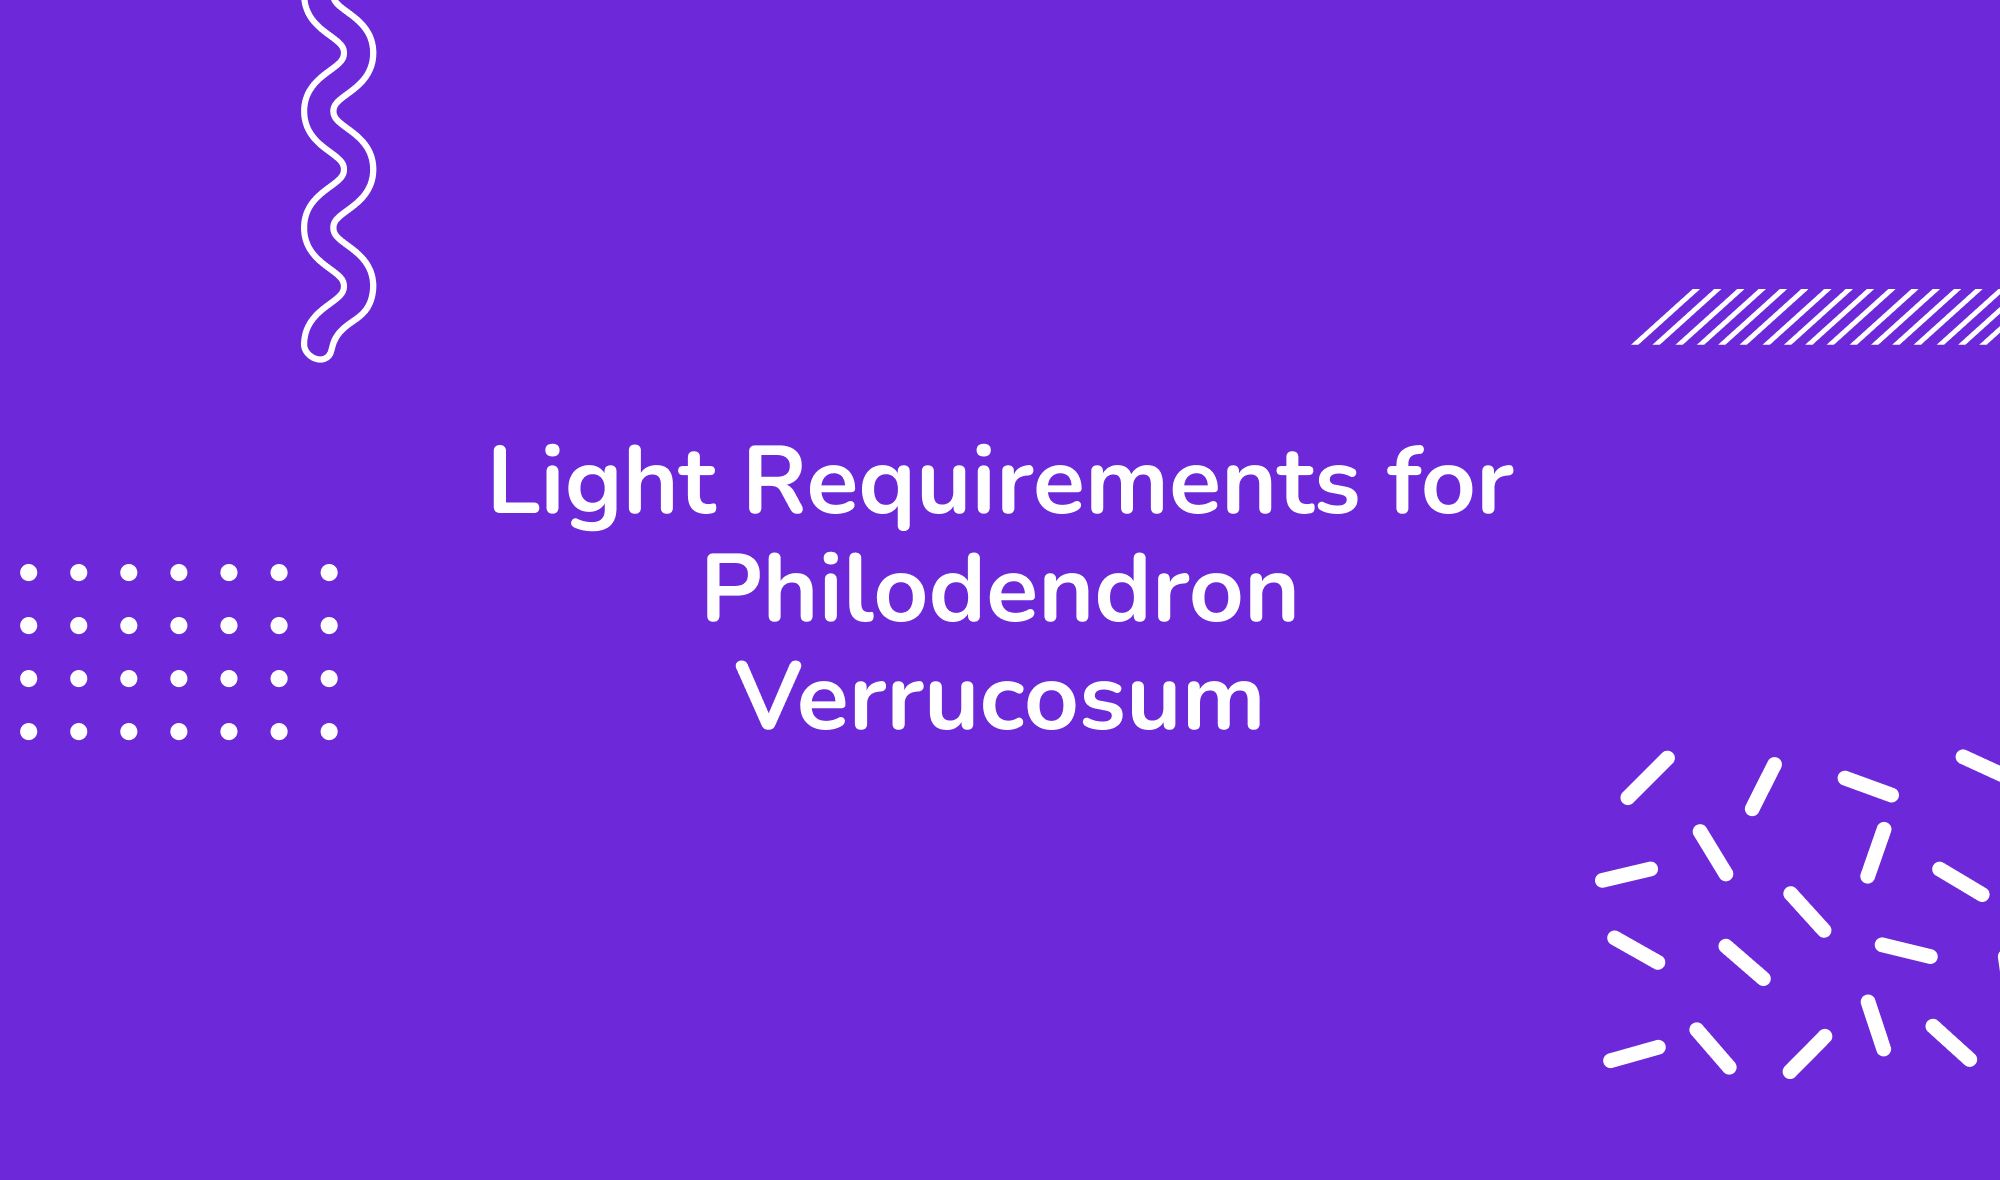 Light Requirements for Philodendron Verrucosum